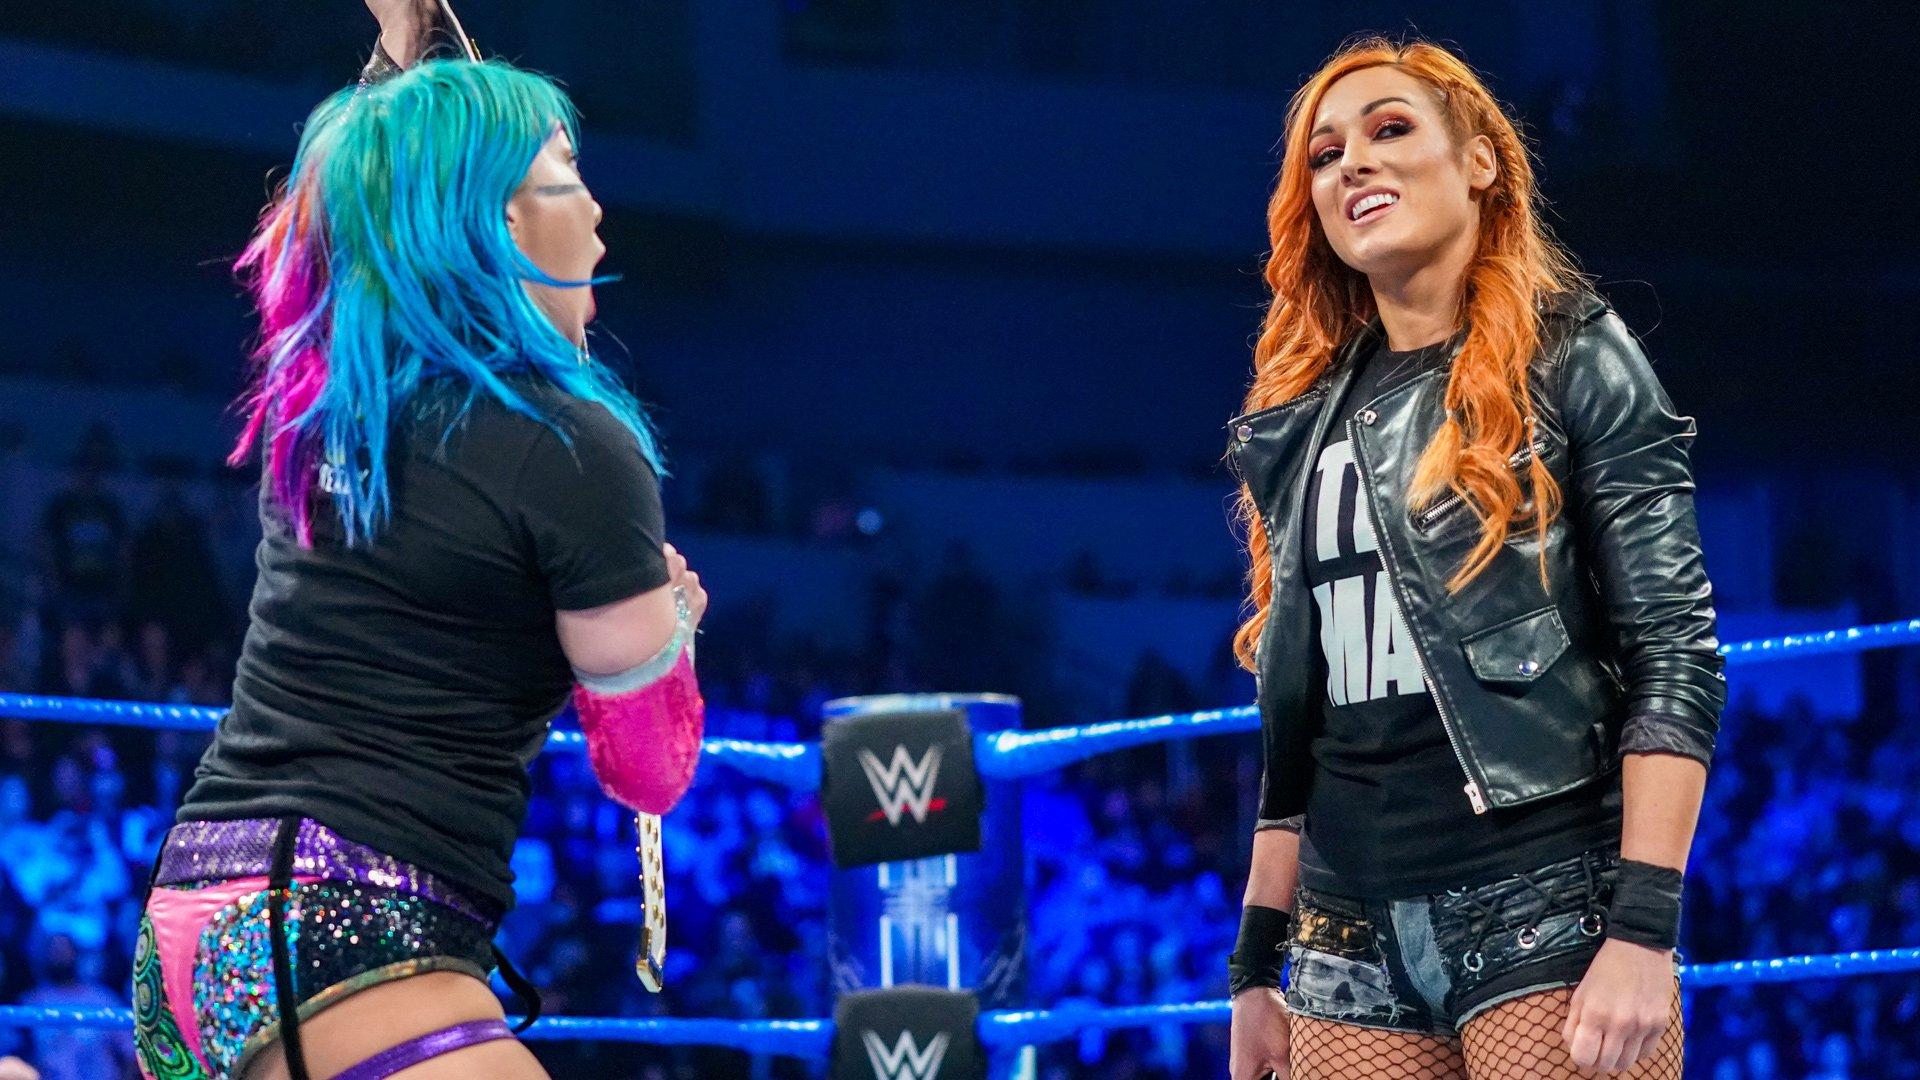 Asuka punches Becky Lynch during heated confrontation: SmackDown